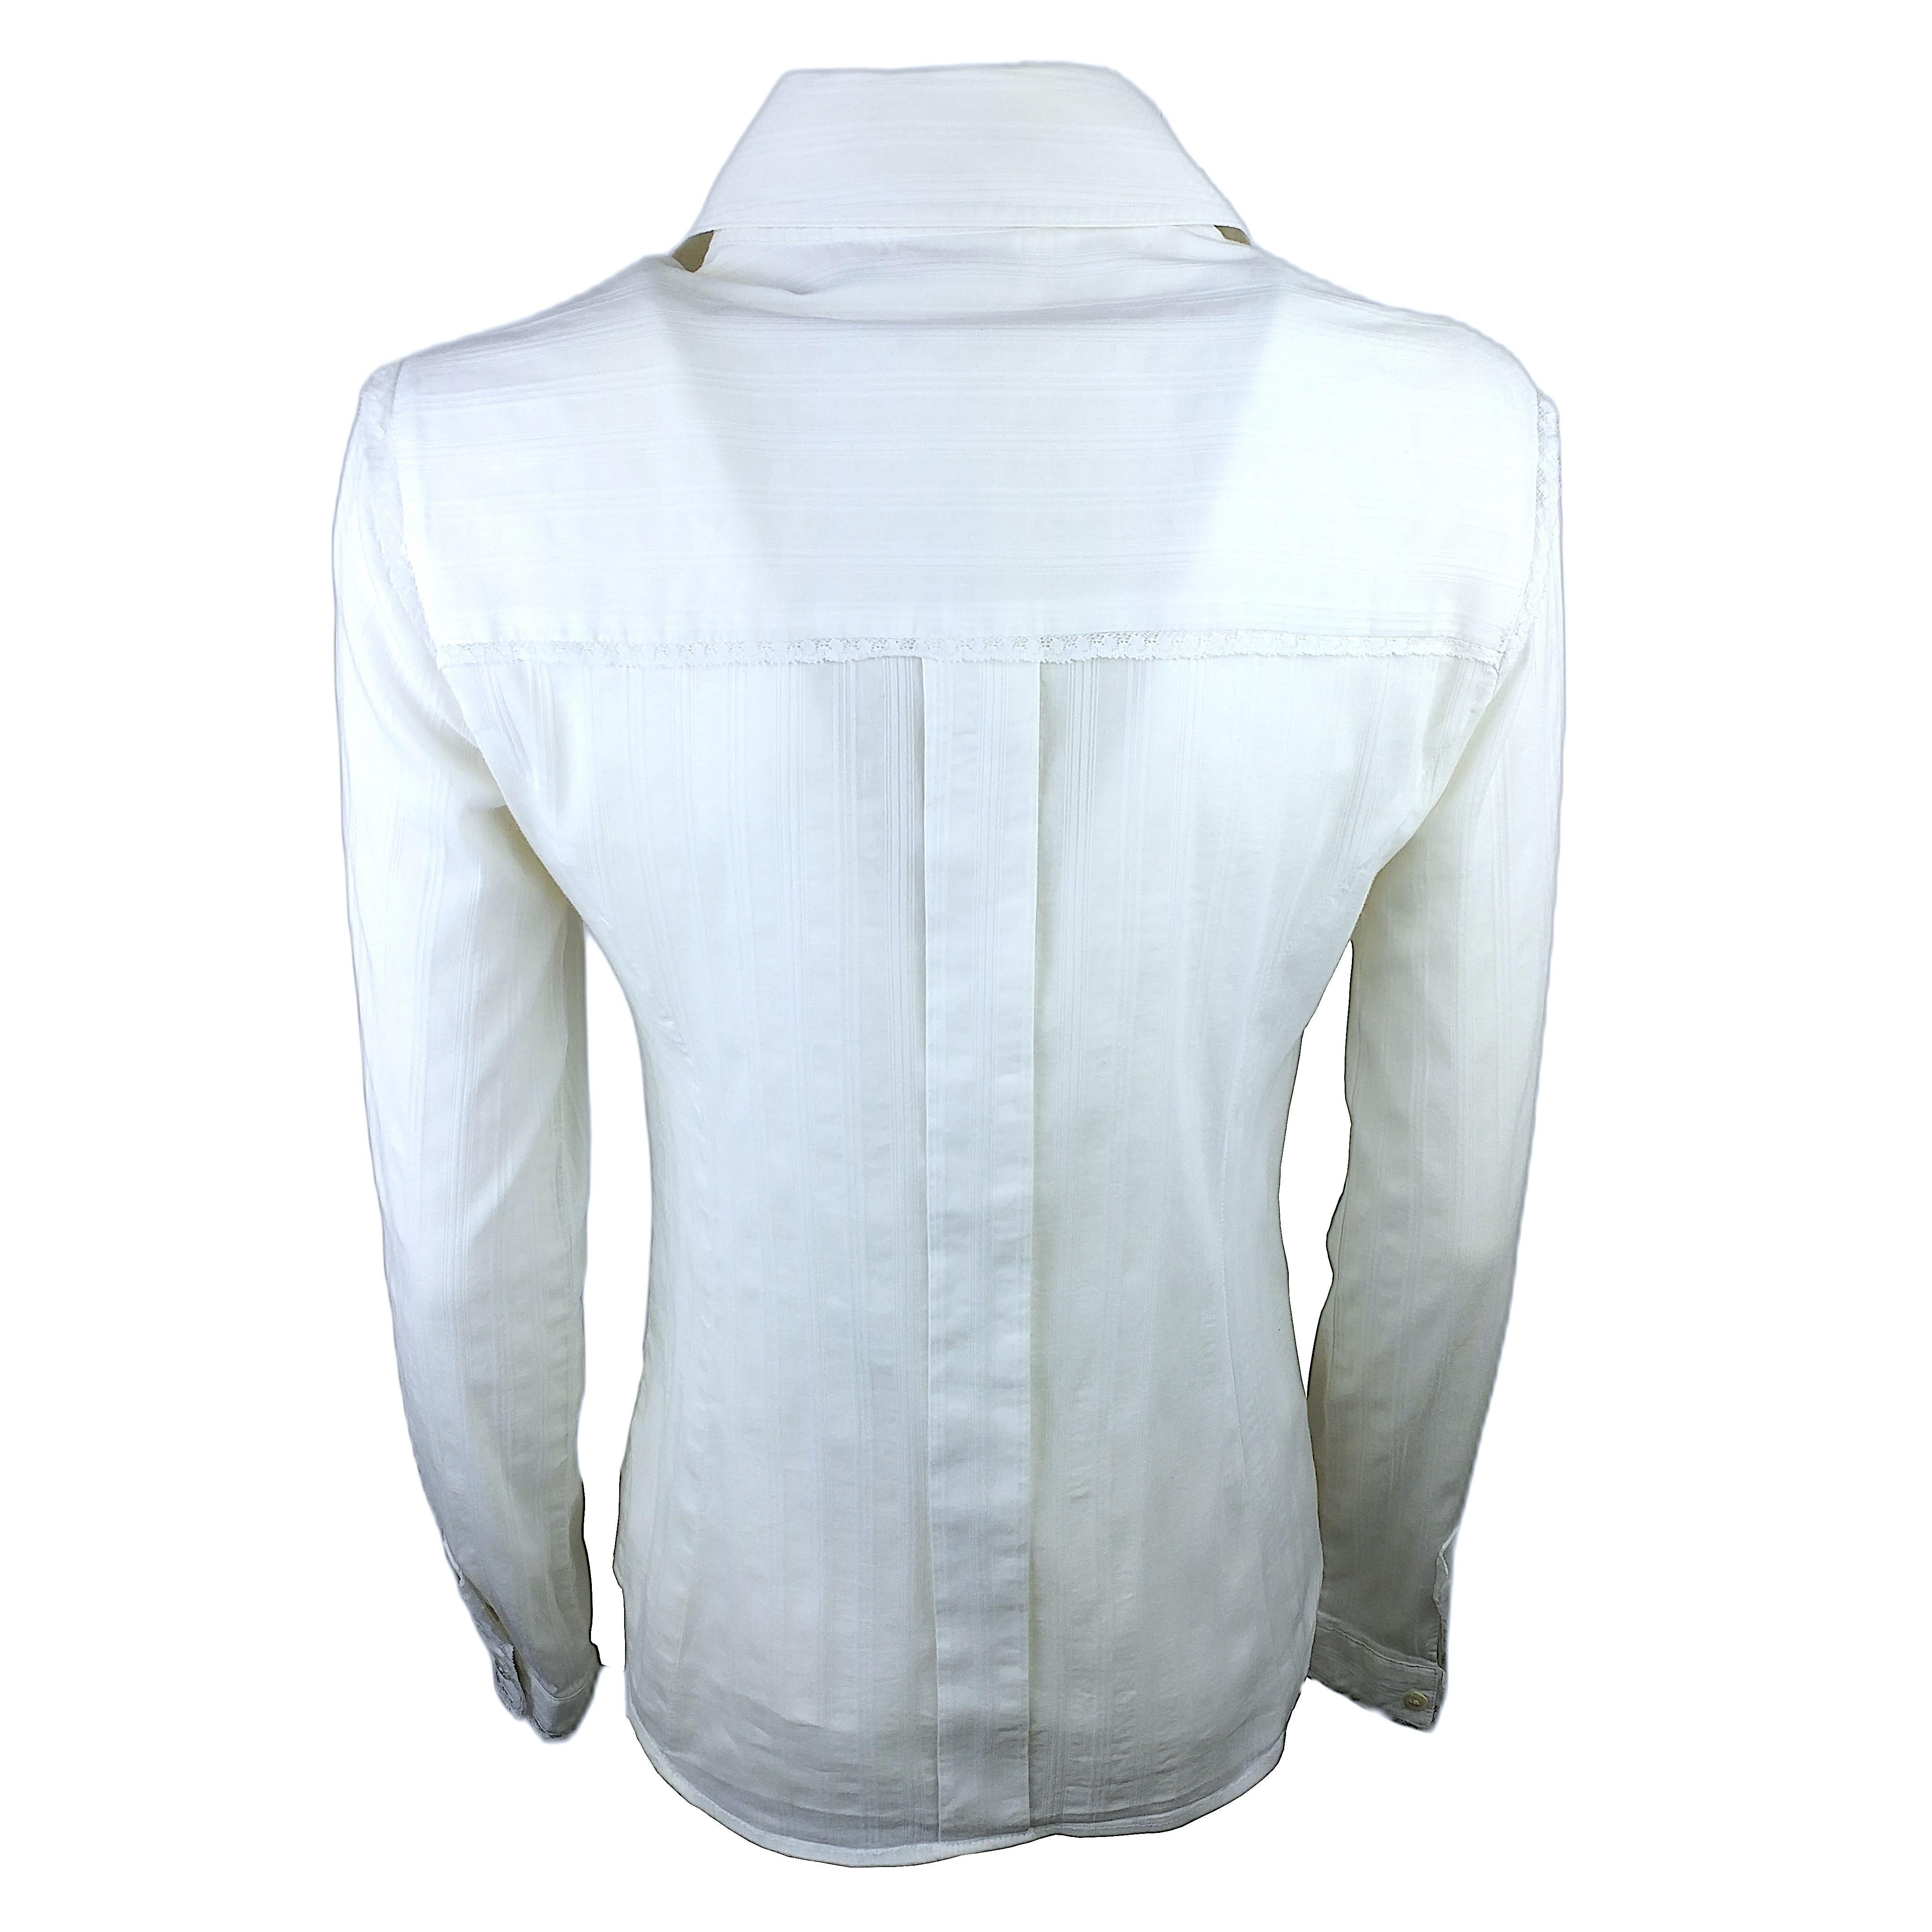 Blue DOLCE & GABBANA – White Shirt with Long Sleeves from the SS 2006 Collection